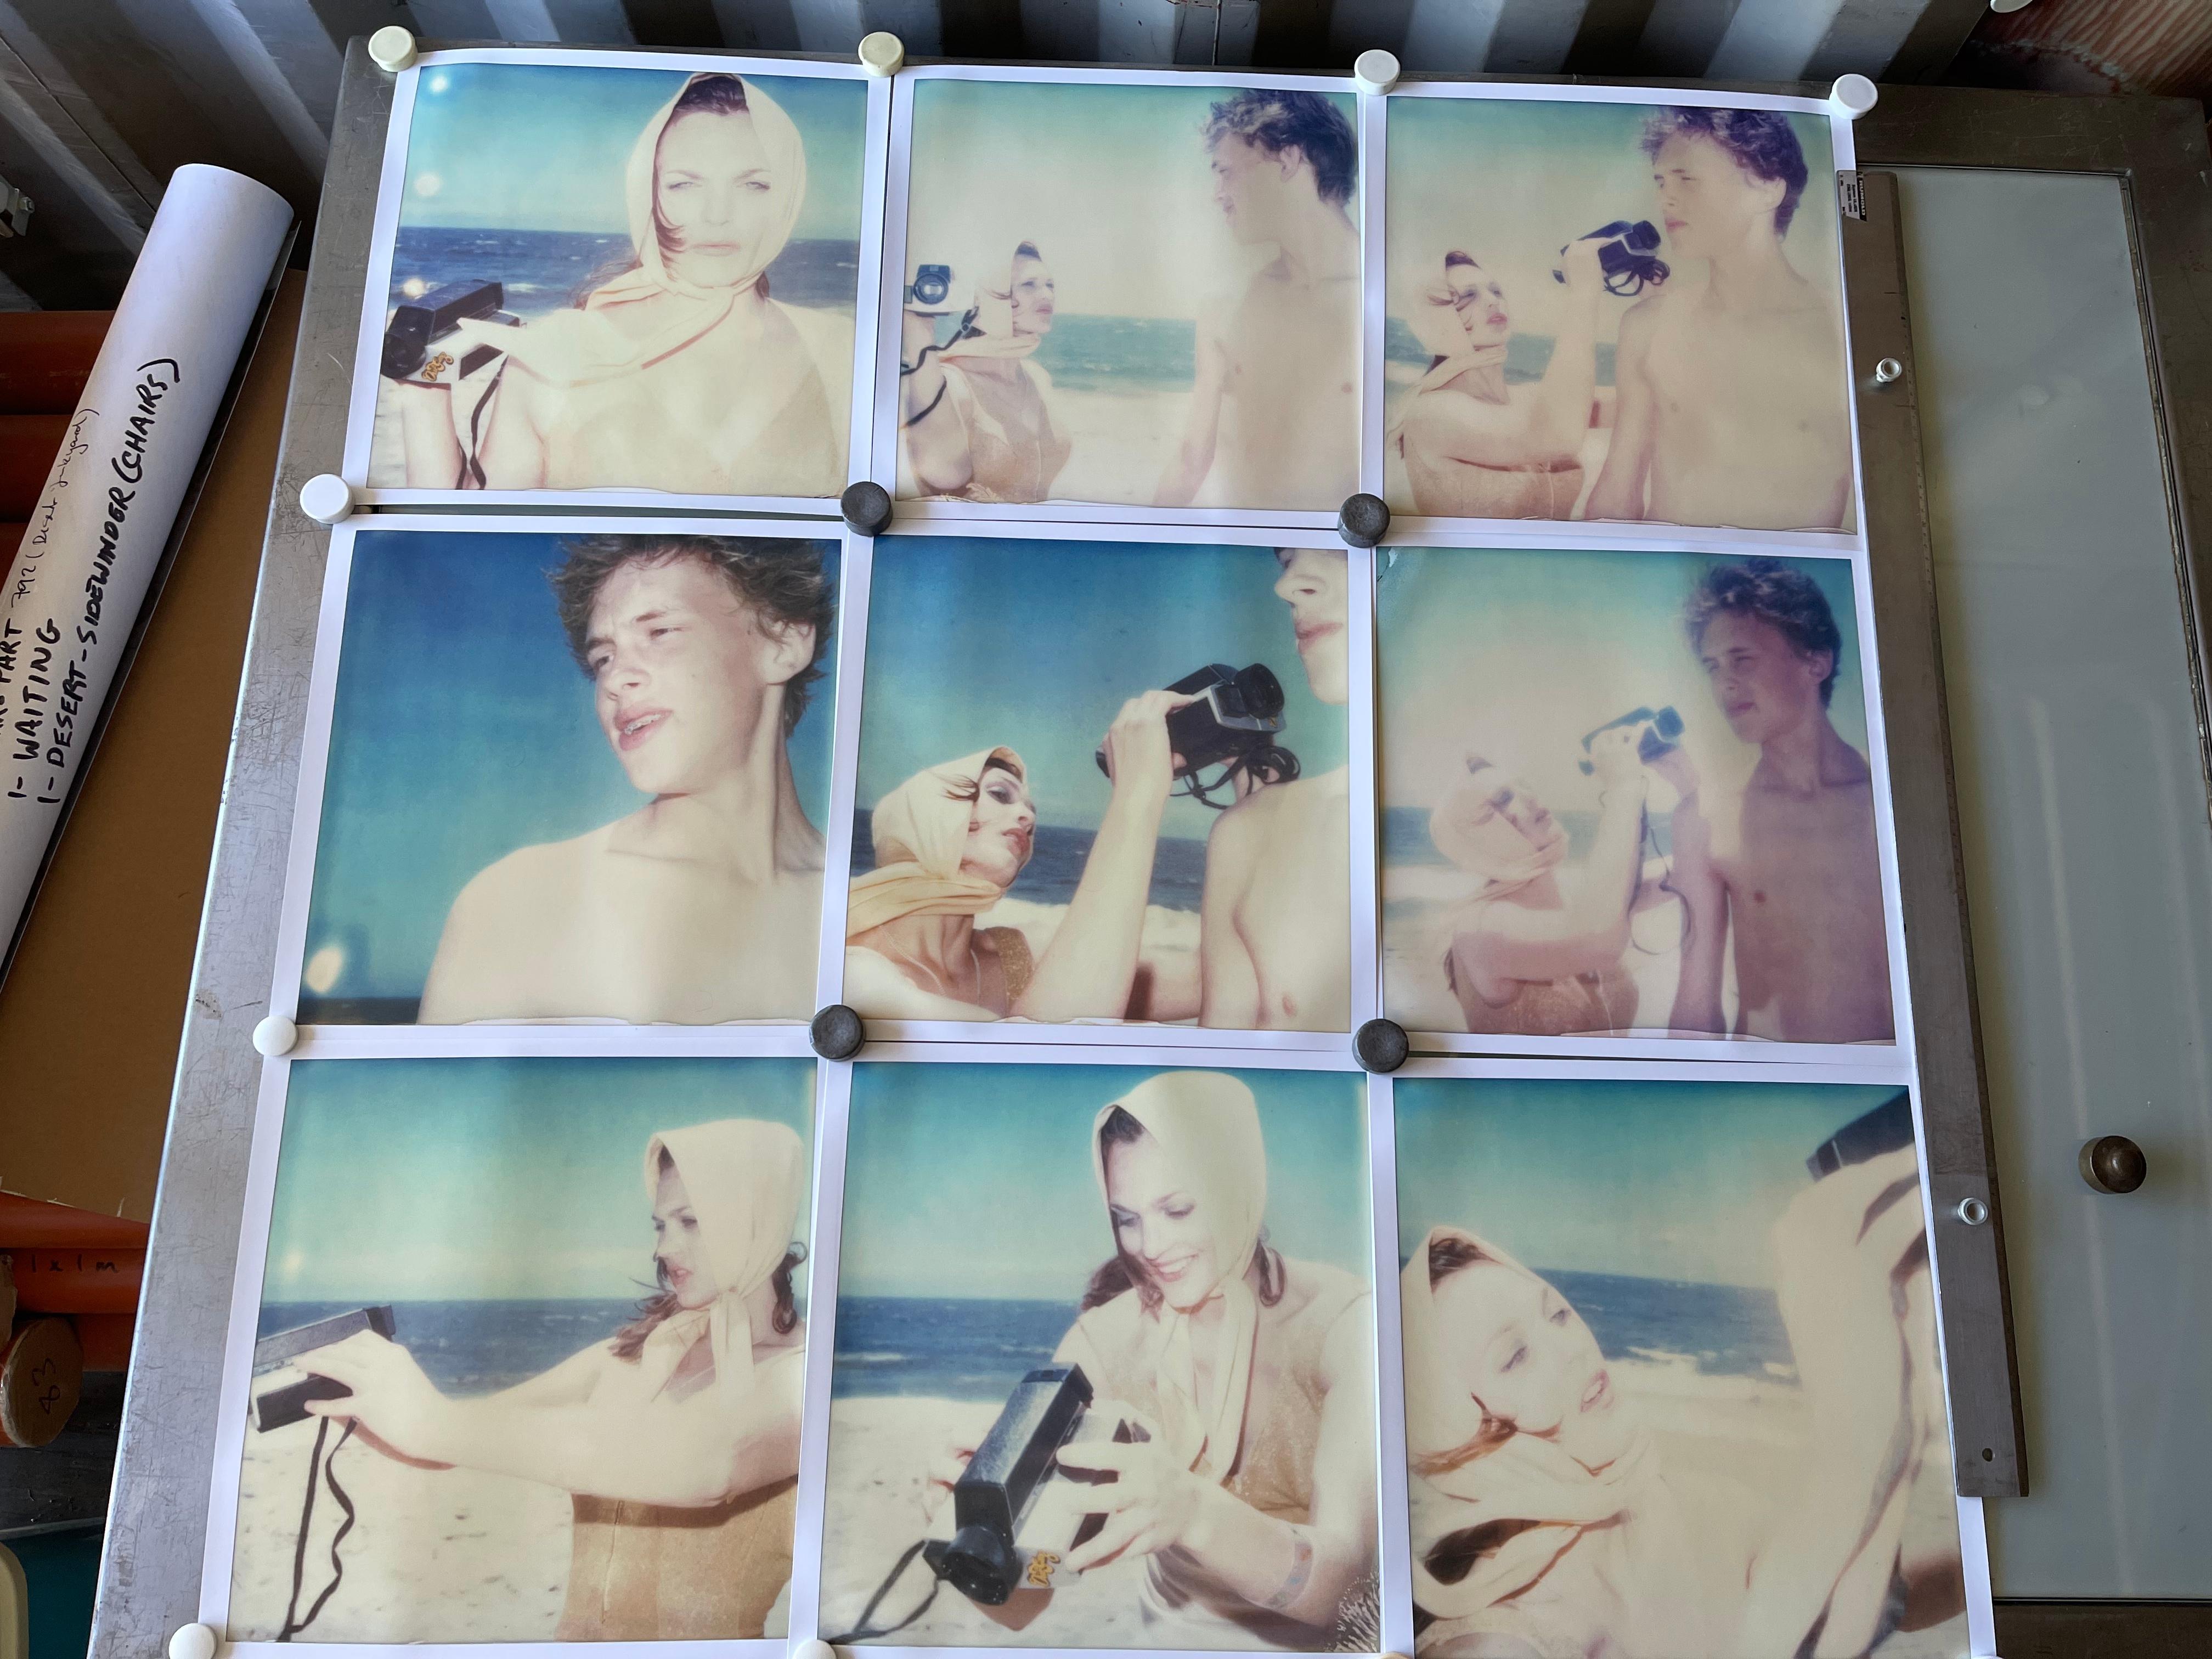 The Diva and the Boy (Beachshoot) - 9 pieces - Polaroid, Vintage, Contemporary - Photograph by Stefanie Schneider